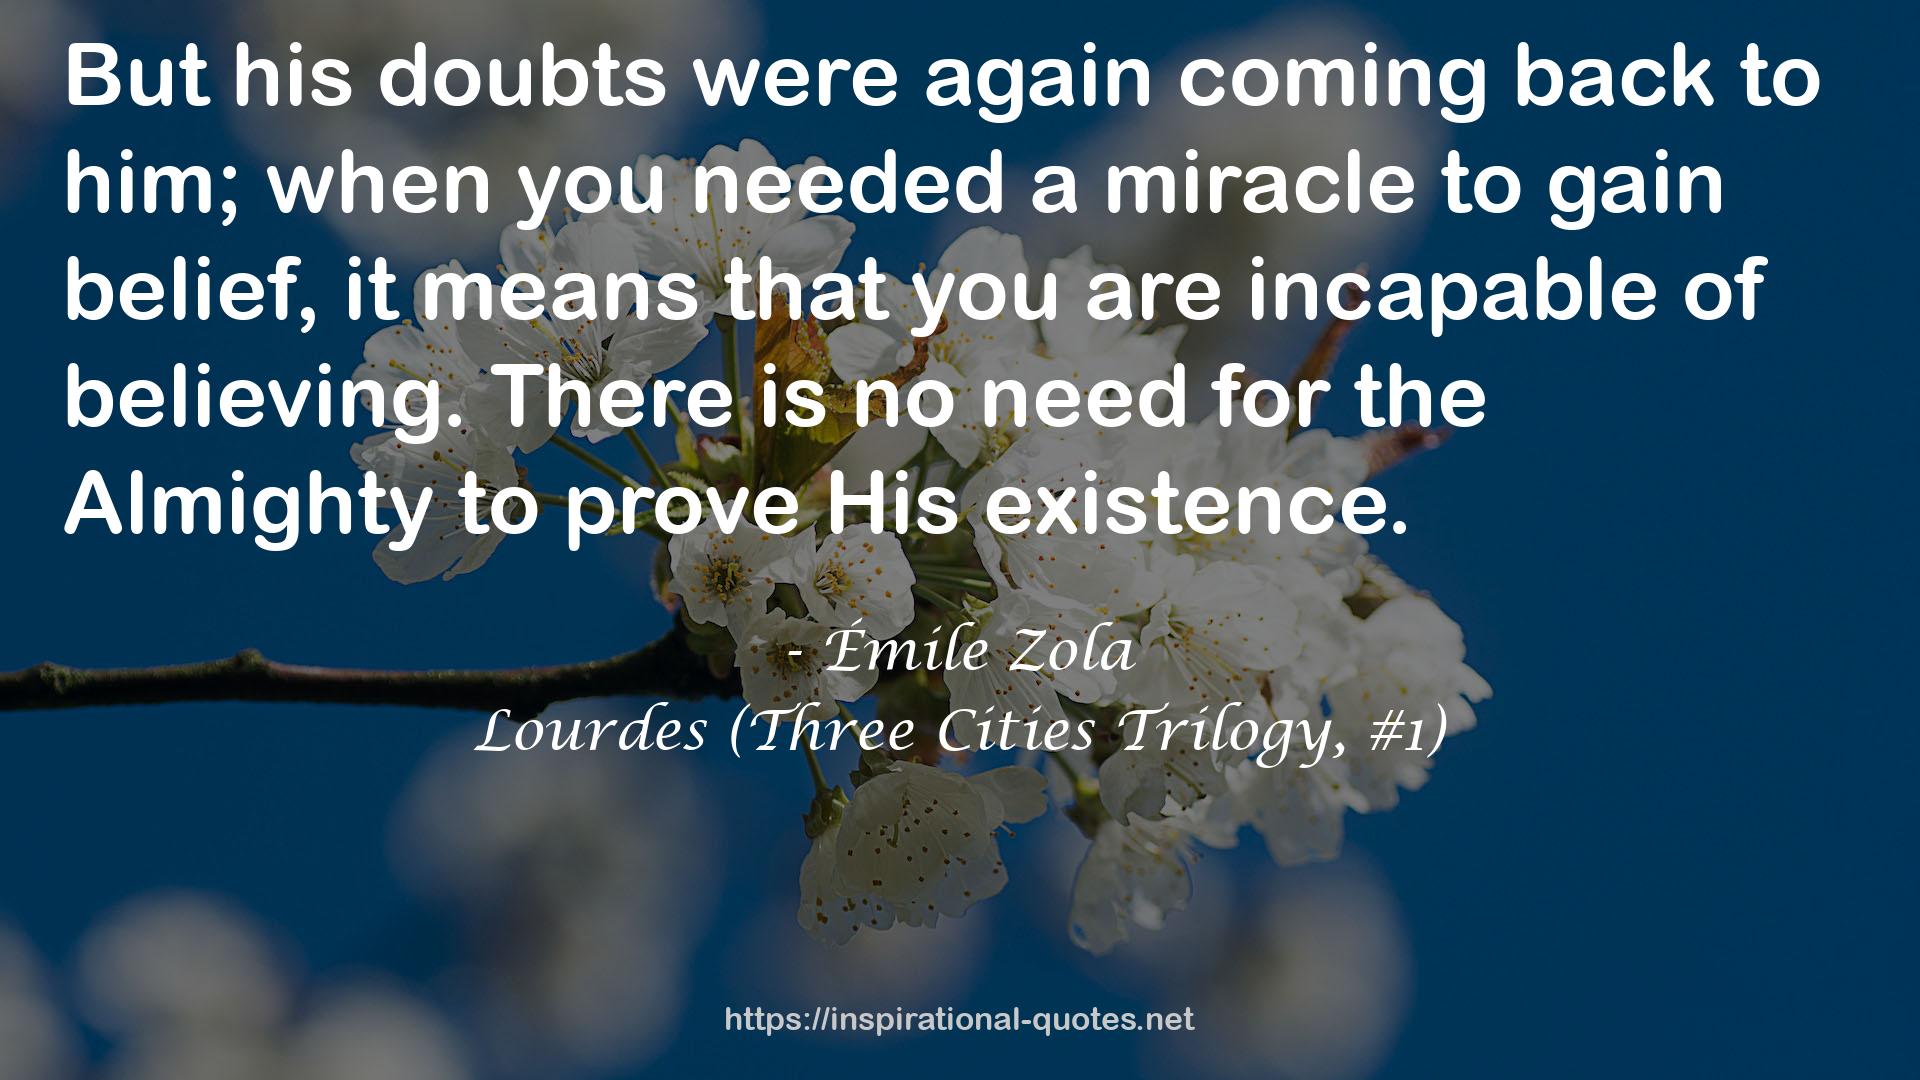 Lourdes (Three Cities Trilogy, #1) QUOTES